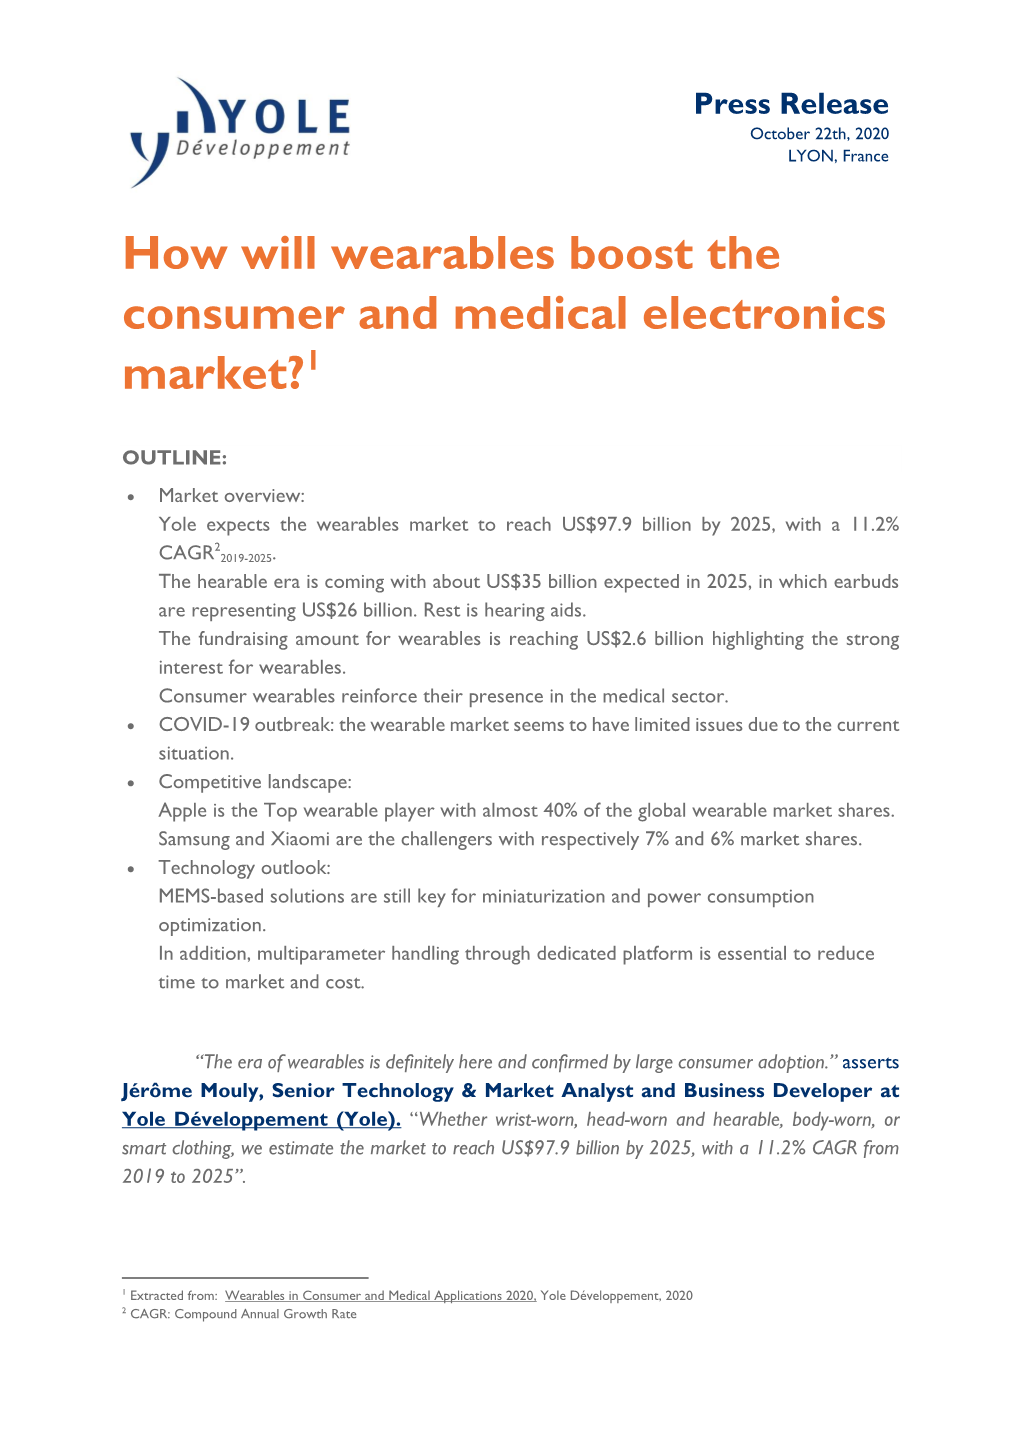 How Will Wearables Boost the Consumer and Medical Electronics Market?1